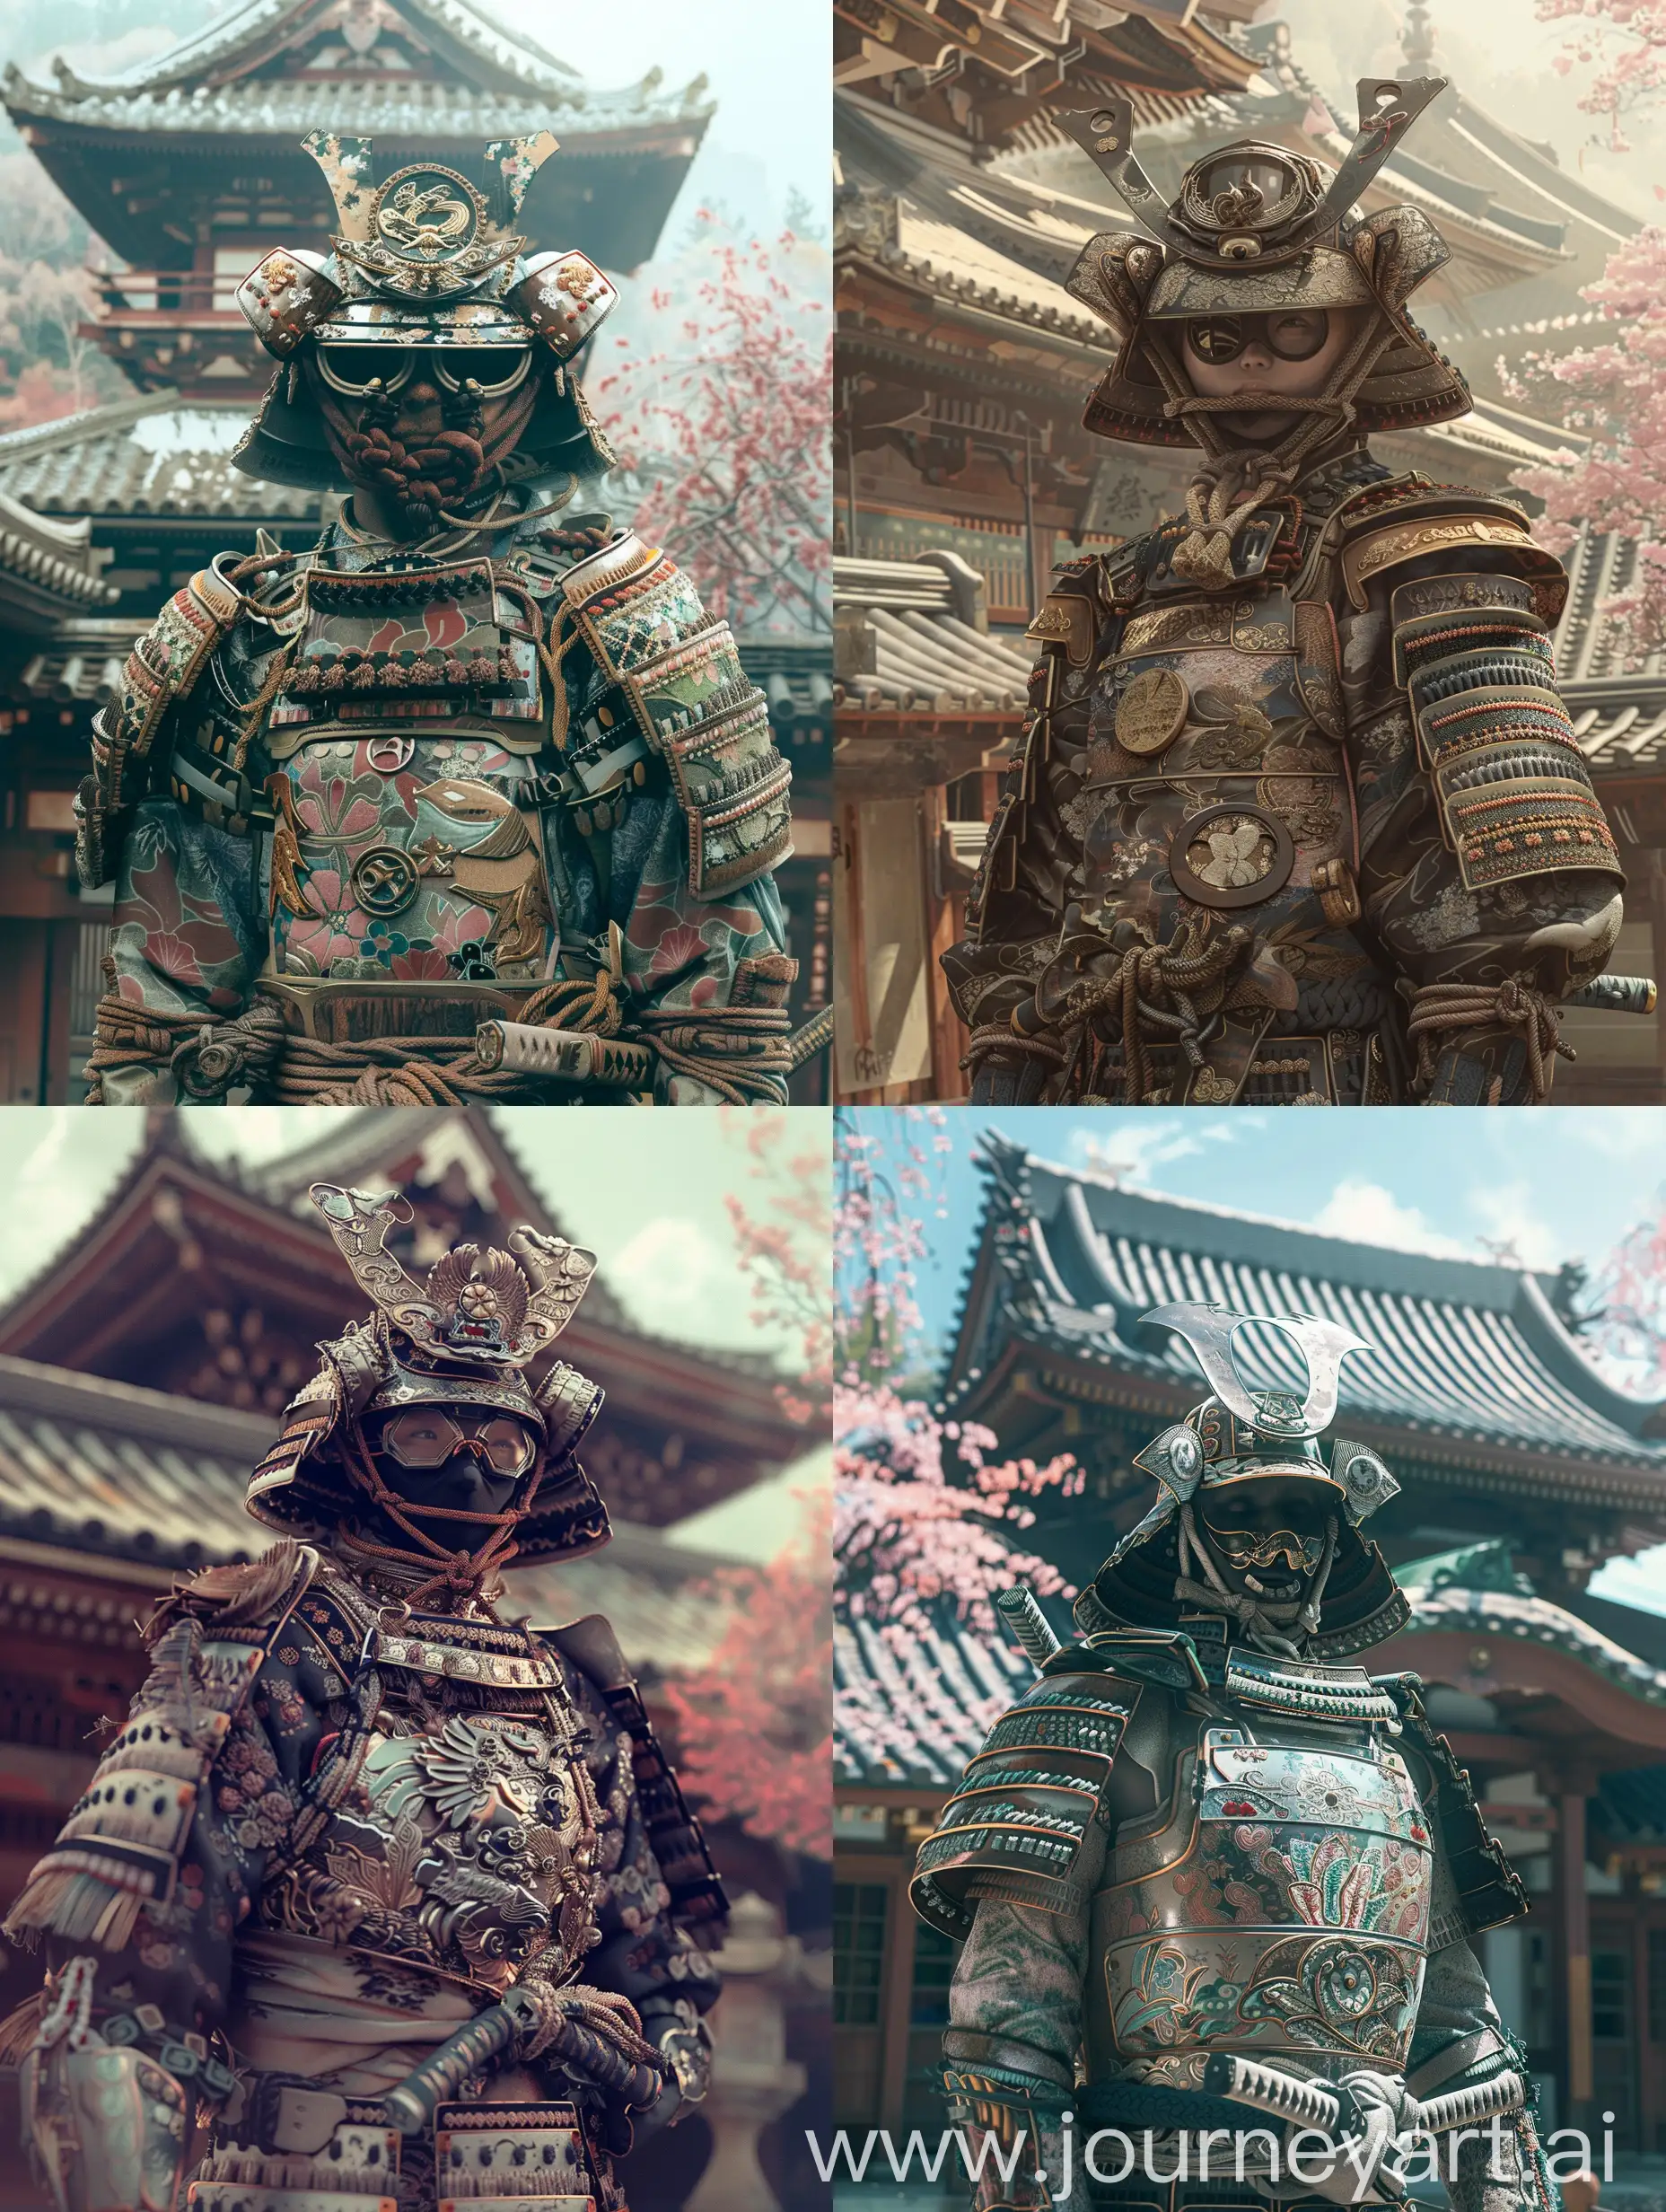 A person dressed in elaborate samurai armor stands in front of a traditional Japanese temple. The armor is ornate, featuring intricate designs with floral and leaf motifs. The individual wears a helmet with a large ornamental crest and protective goggles, and carries a sheathed katana at their waist. The background includes the detailed, sloping rooftops of the temple, with some pink blossoms visible.